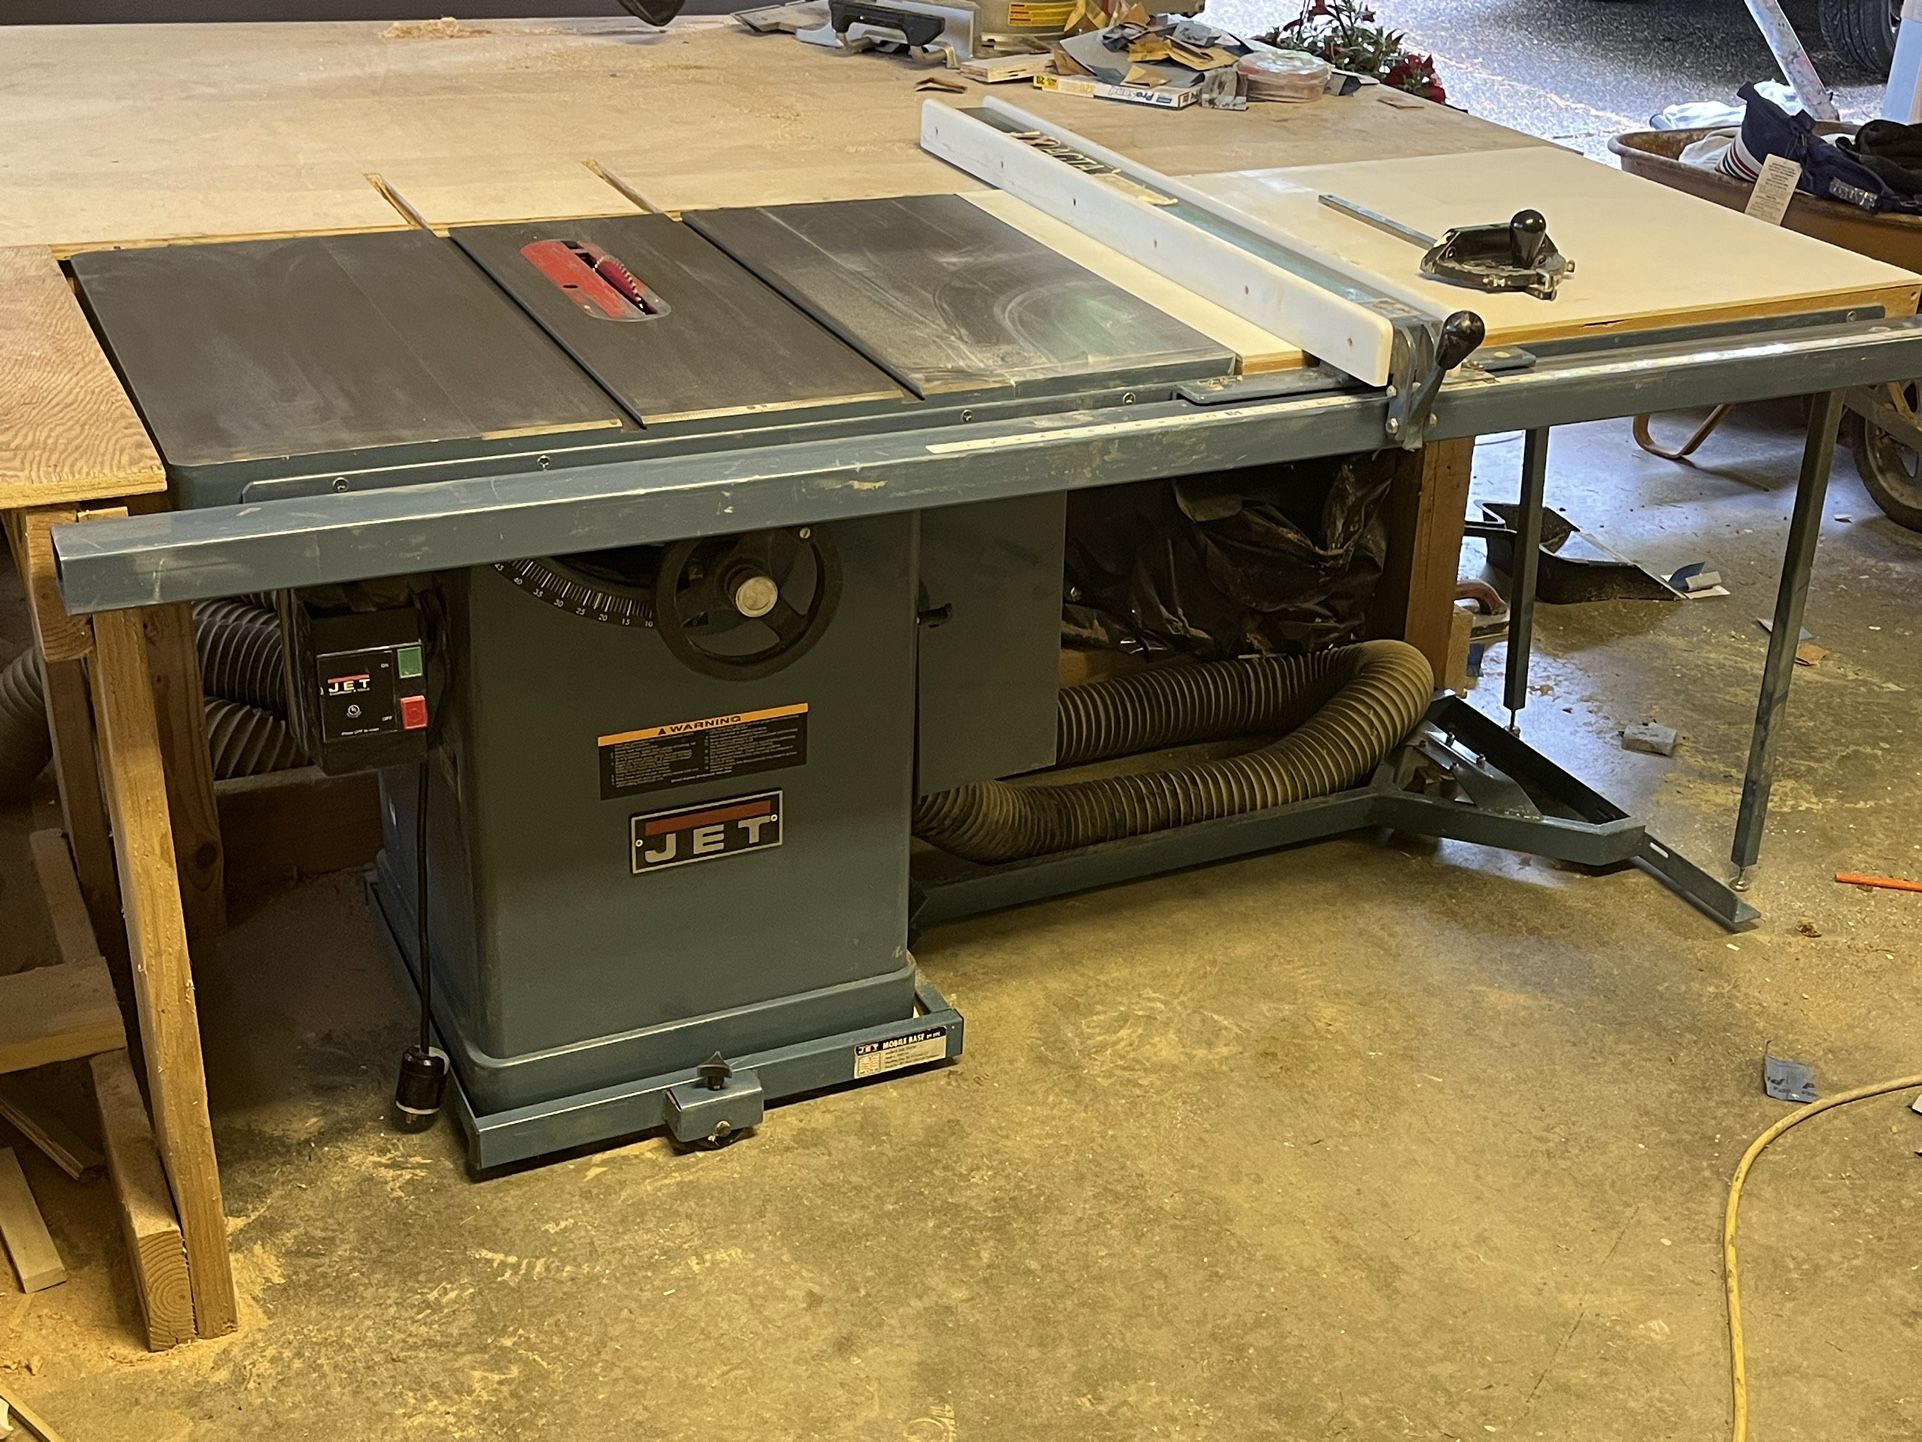 12”’ Jet Table Saw